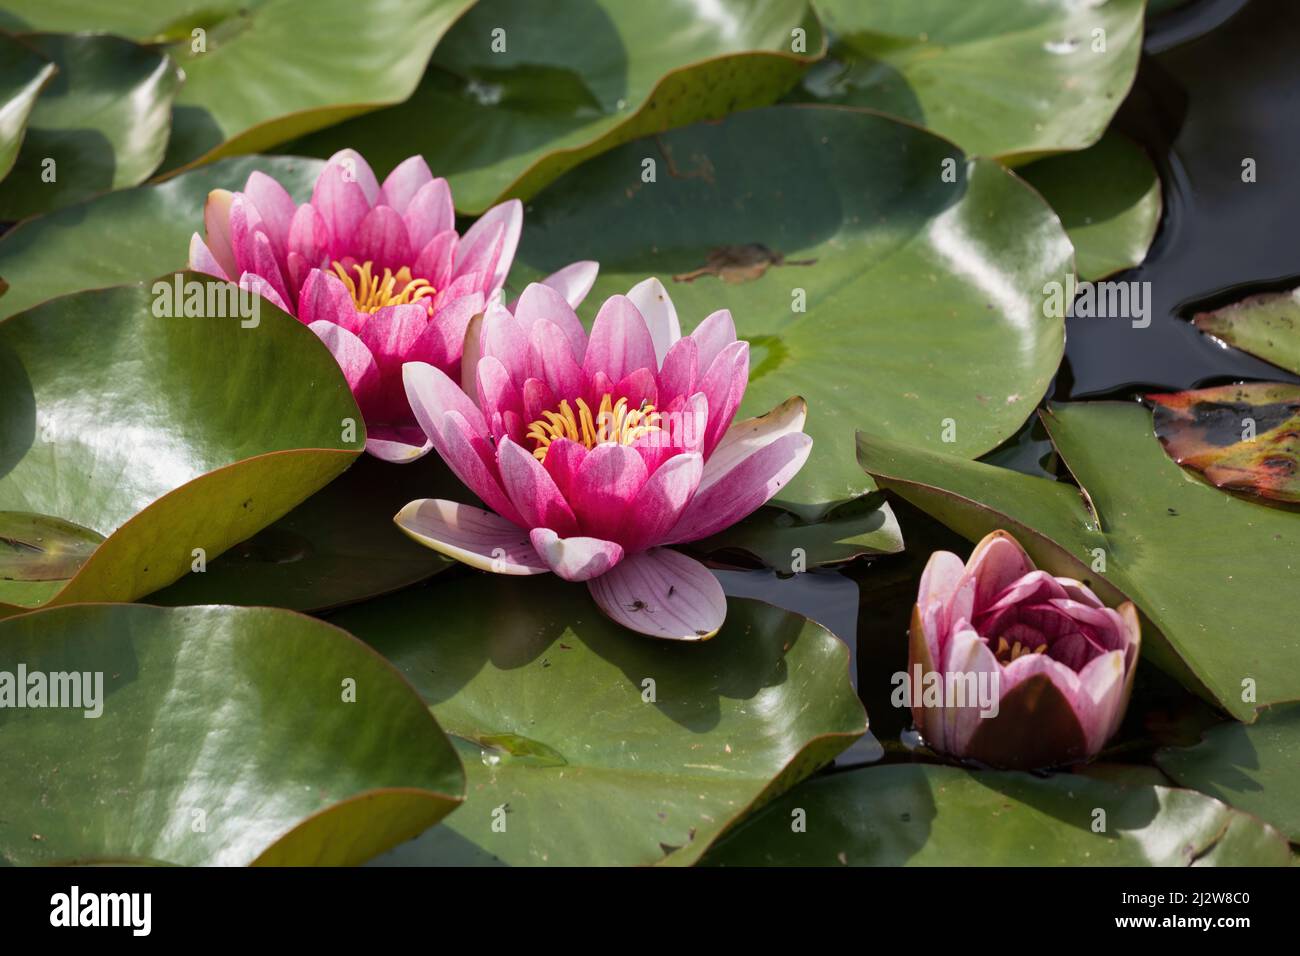 Water lily 'James Brydon' in bloom, deep pink flowering plants in the family Nymphaeaceae. Stock Photo